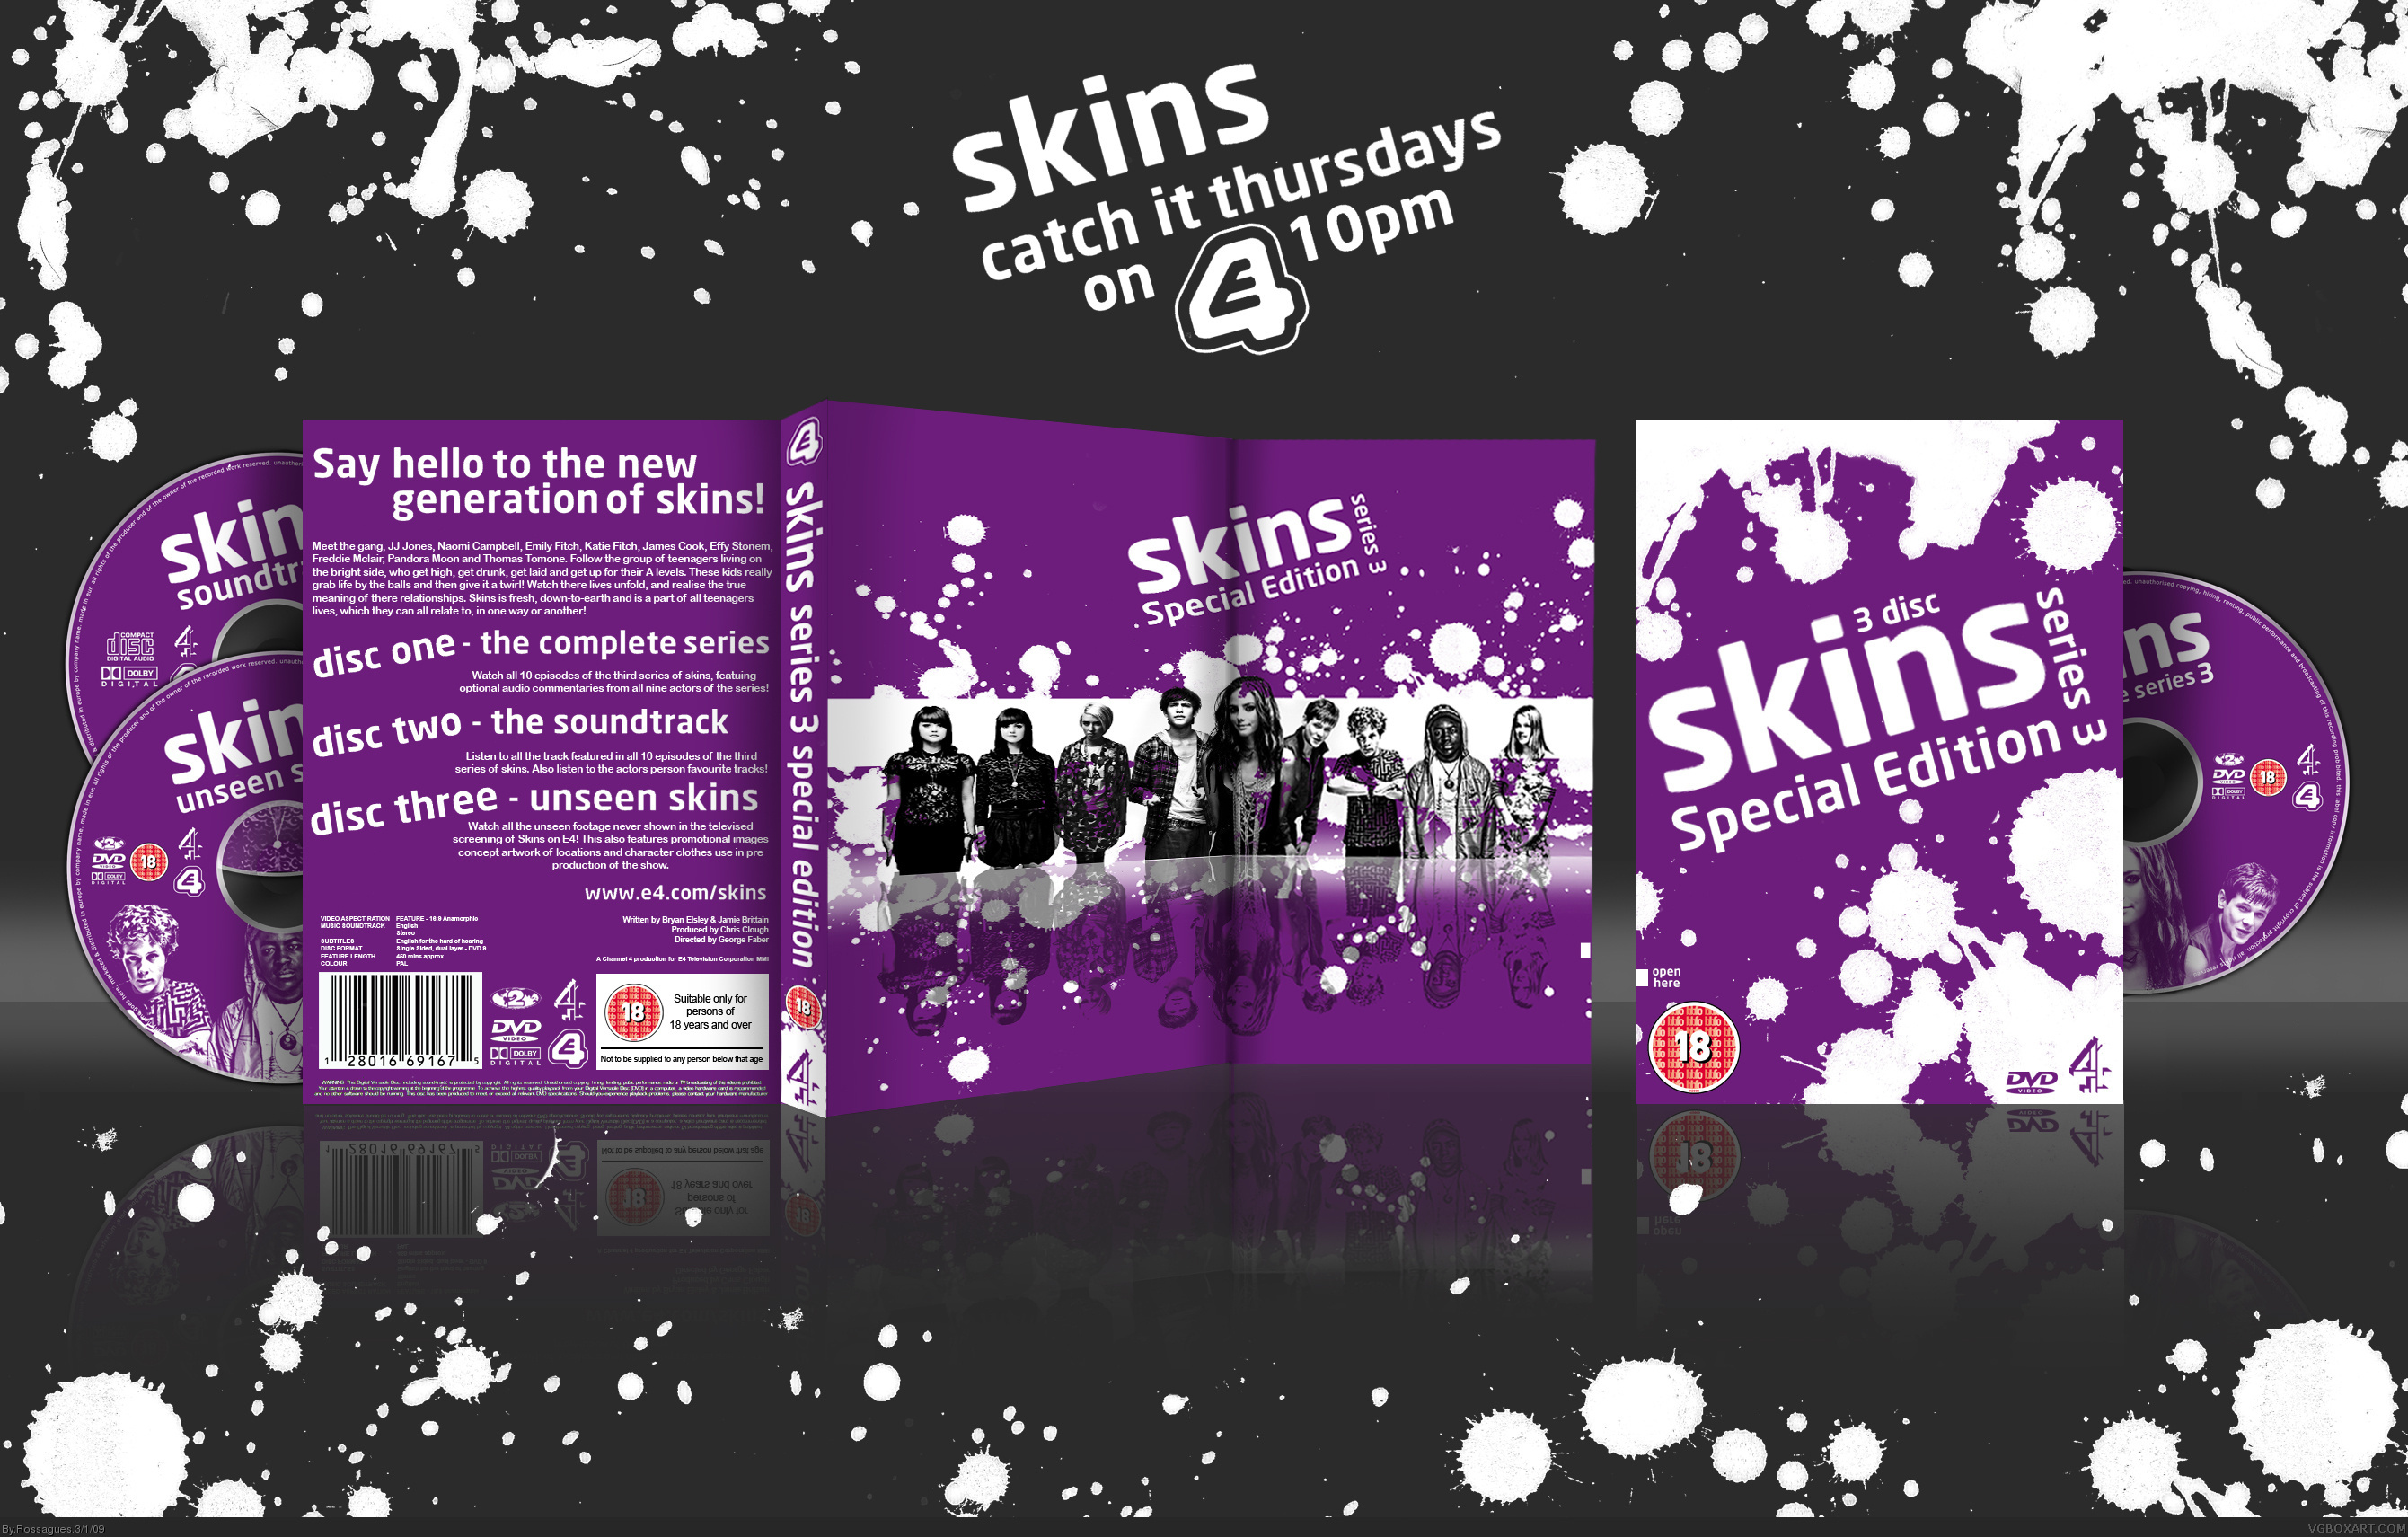 Skins: Series 3: Special Edition box cover